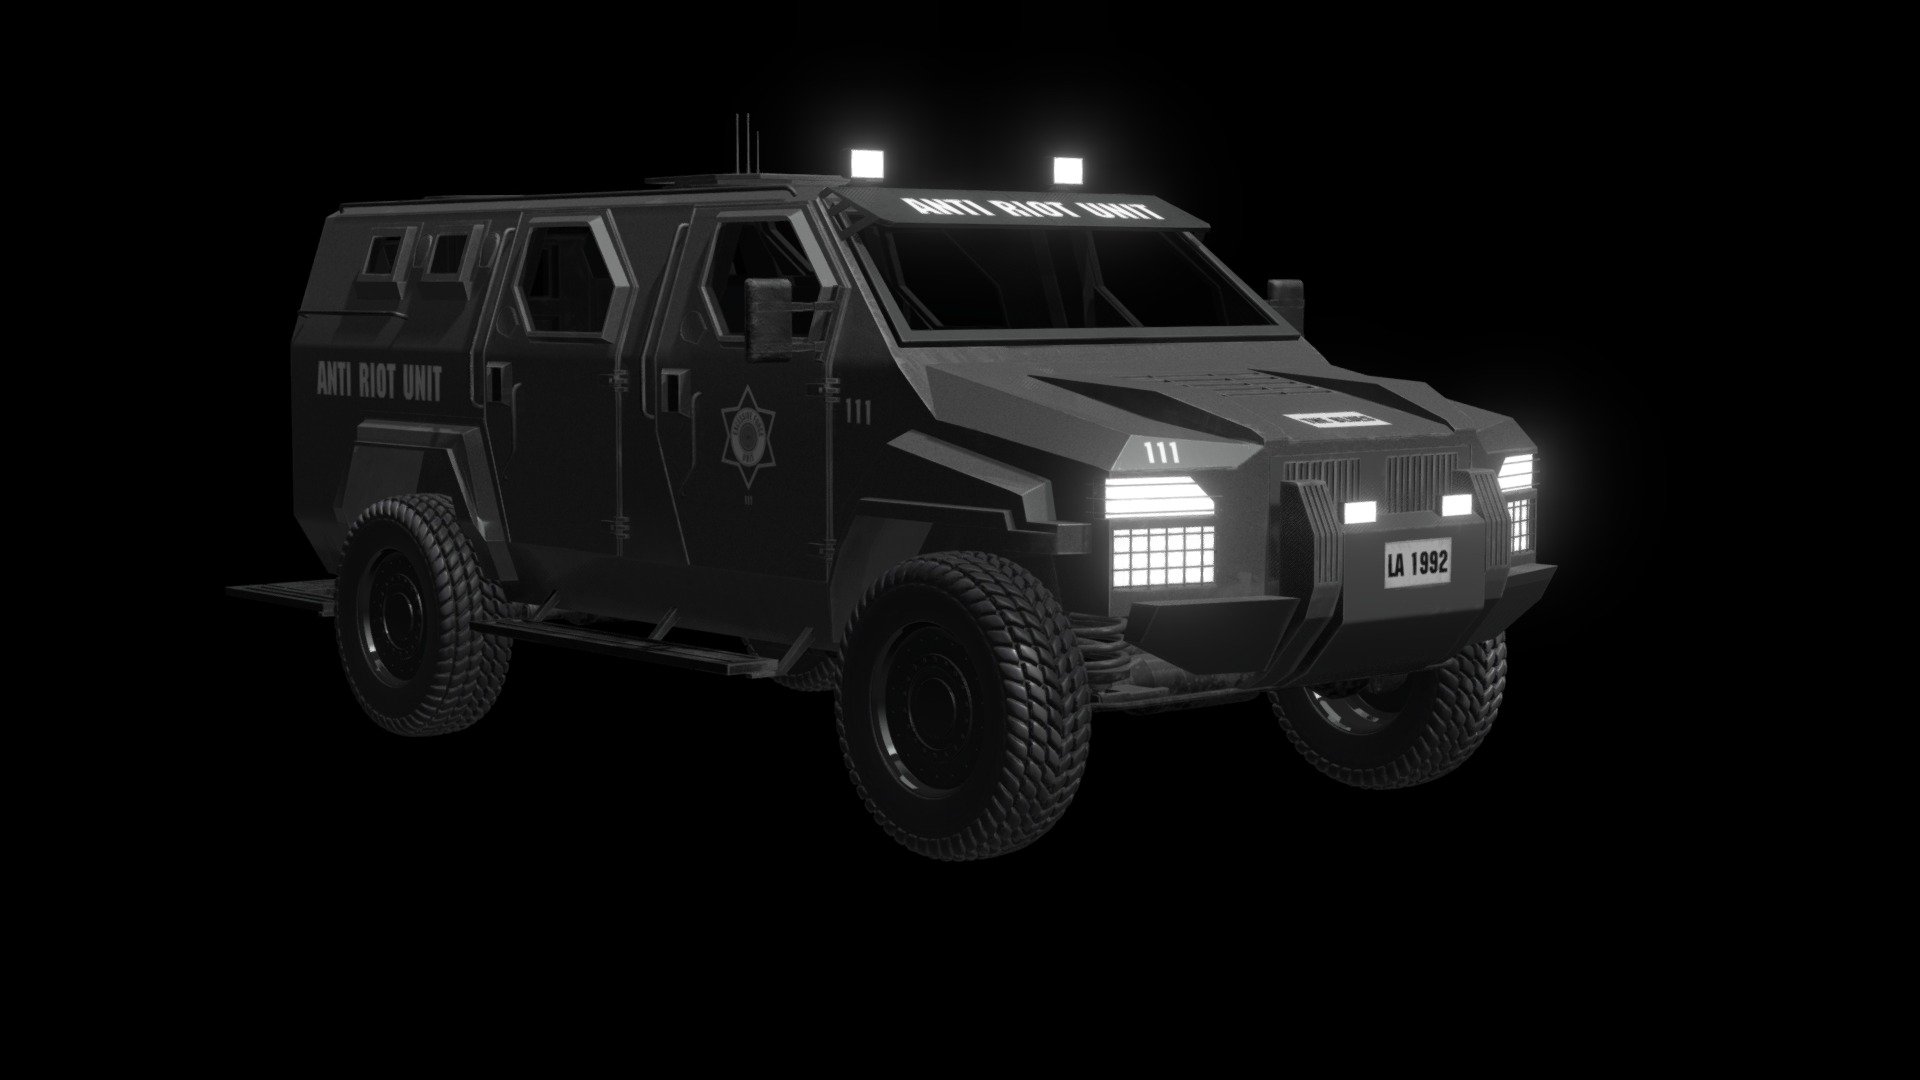 Pitbull Armoured Police Vehicle for Belgium musician Løyd's music video Boys In Blue.
Music Video: https://youtu.be/gU0i6gcMm40

Built on the model by Mohamed Amir on CGTrader - Armoured Police Truck - 3D model by MW Stands For (@mwstandsfor) 3d model